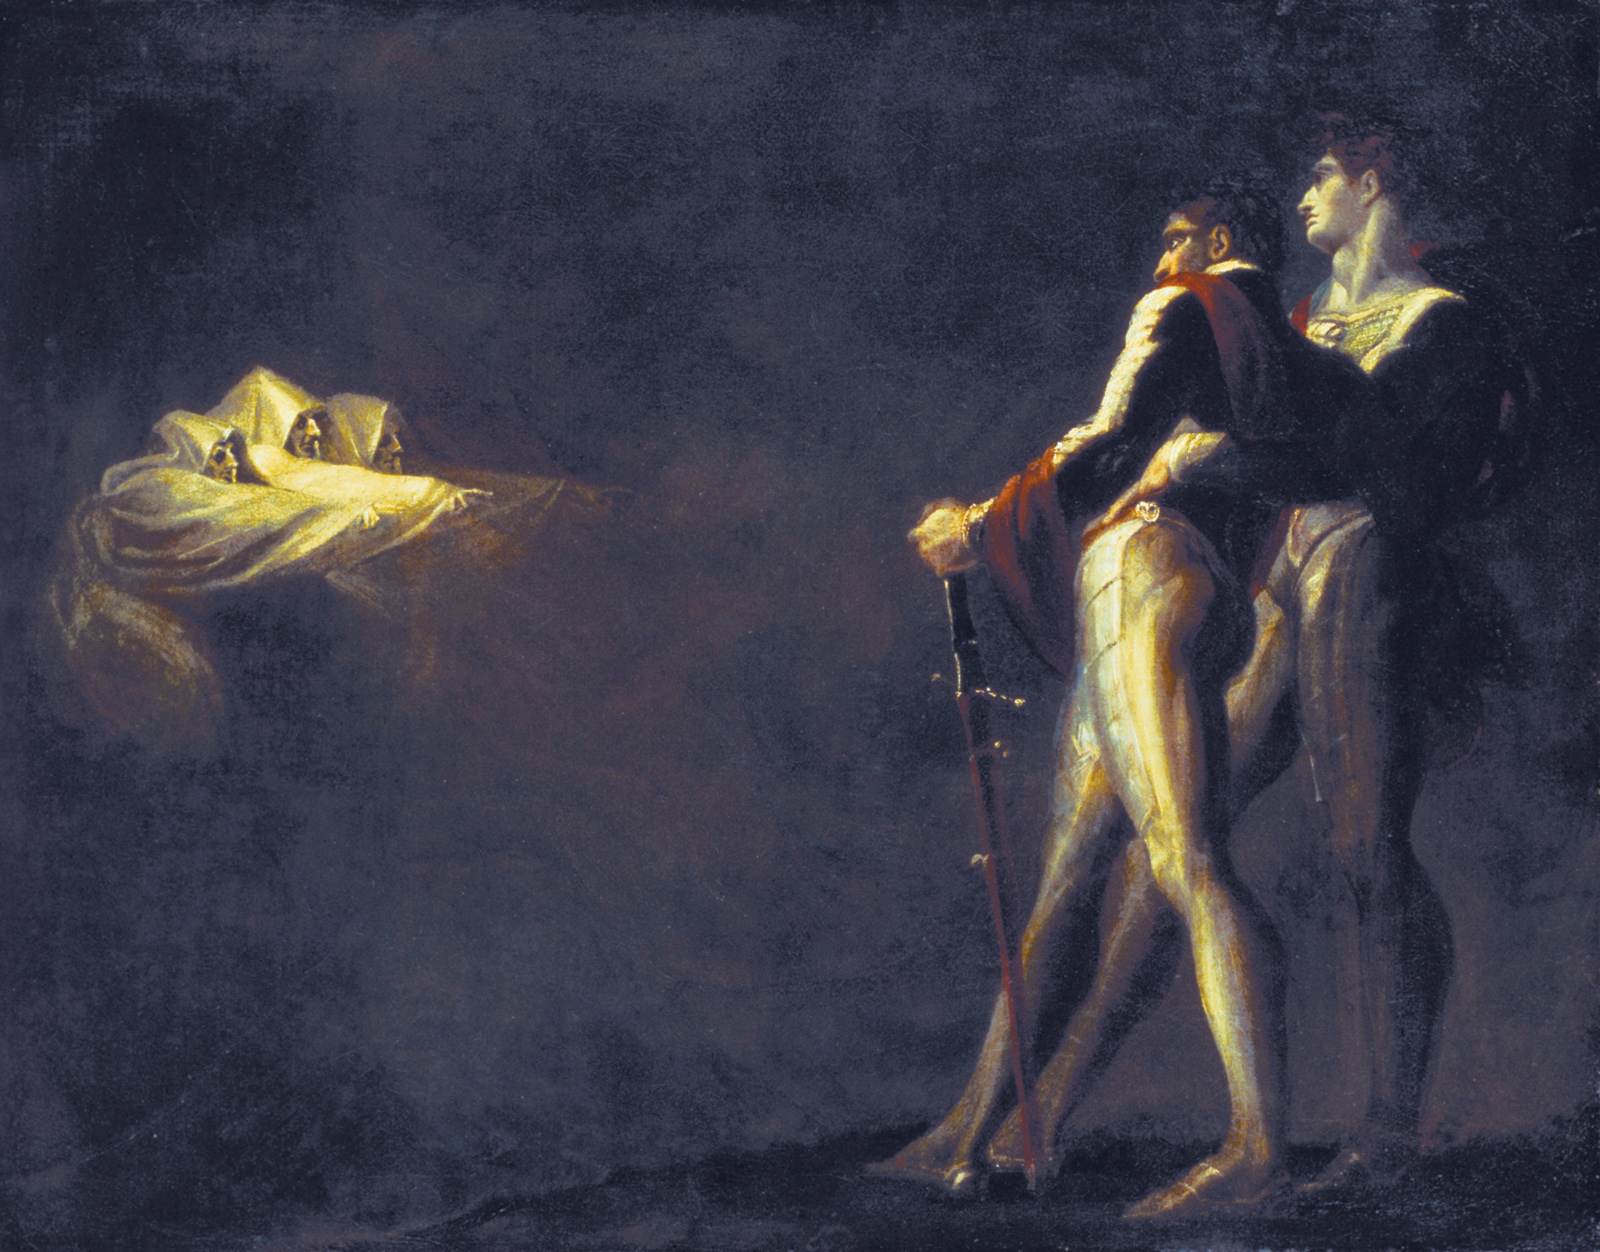 ‘The Three Witches Appearing to Macbeth and Banquo’; xpainting by Henry Fuseli, circa 1800–1810